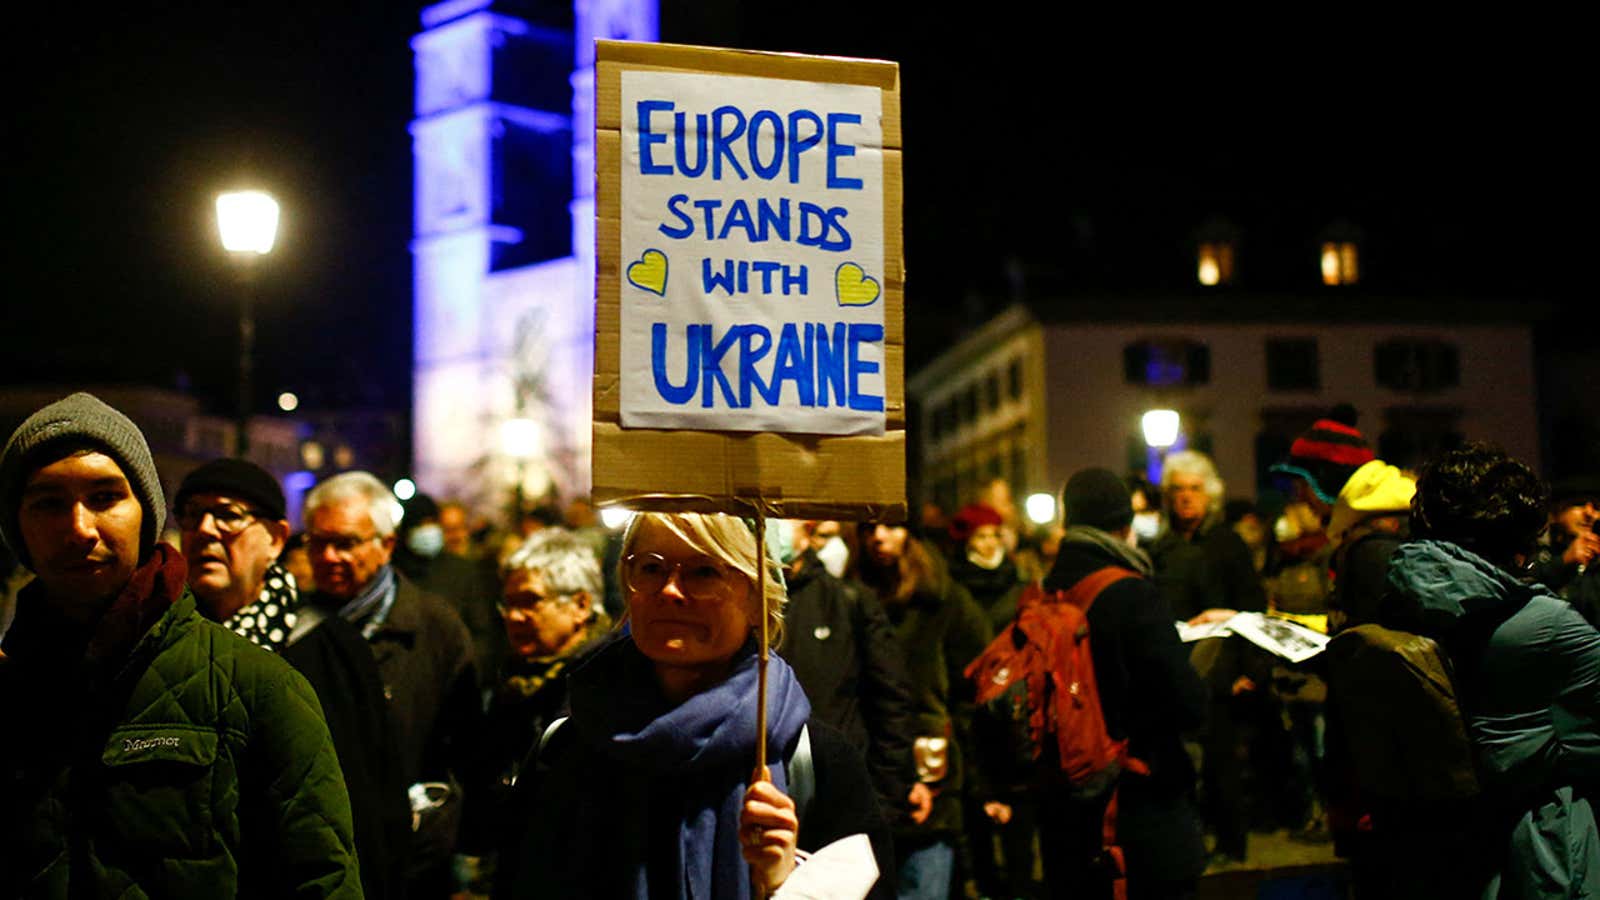 Protestors holding a sign that reads “Europe standing with Ukraine”